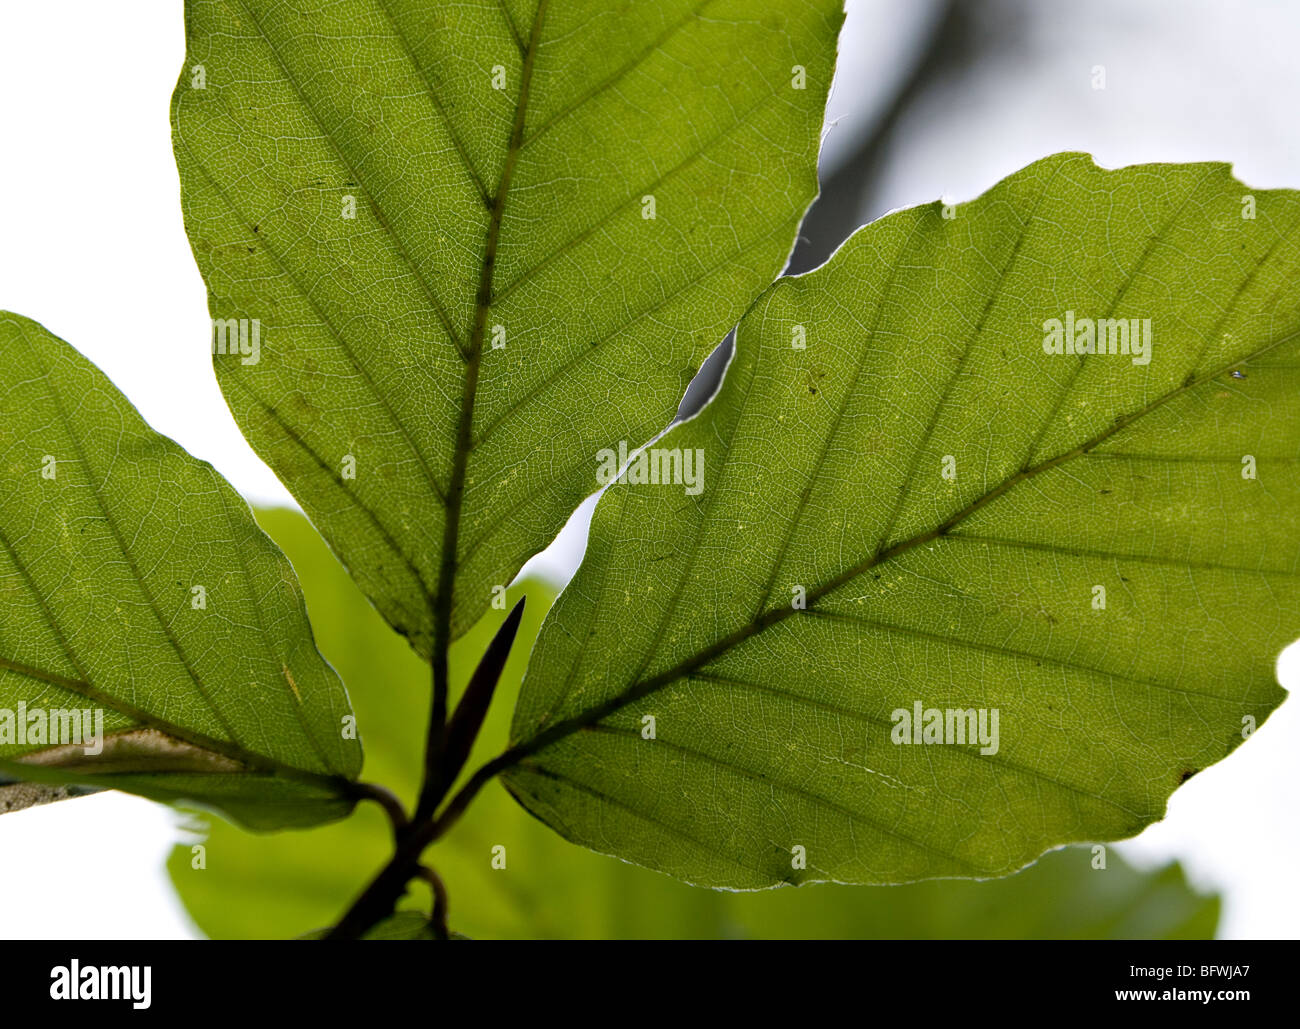 Backlit macro shot of beech leaves revealing the cell structure Stock Photo